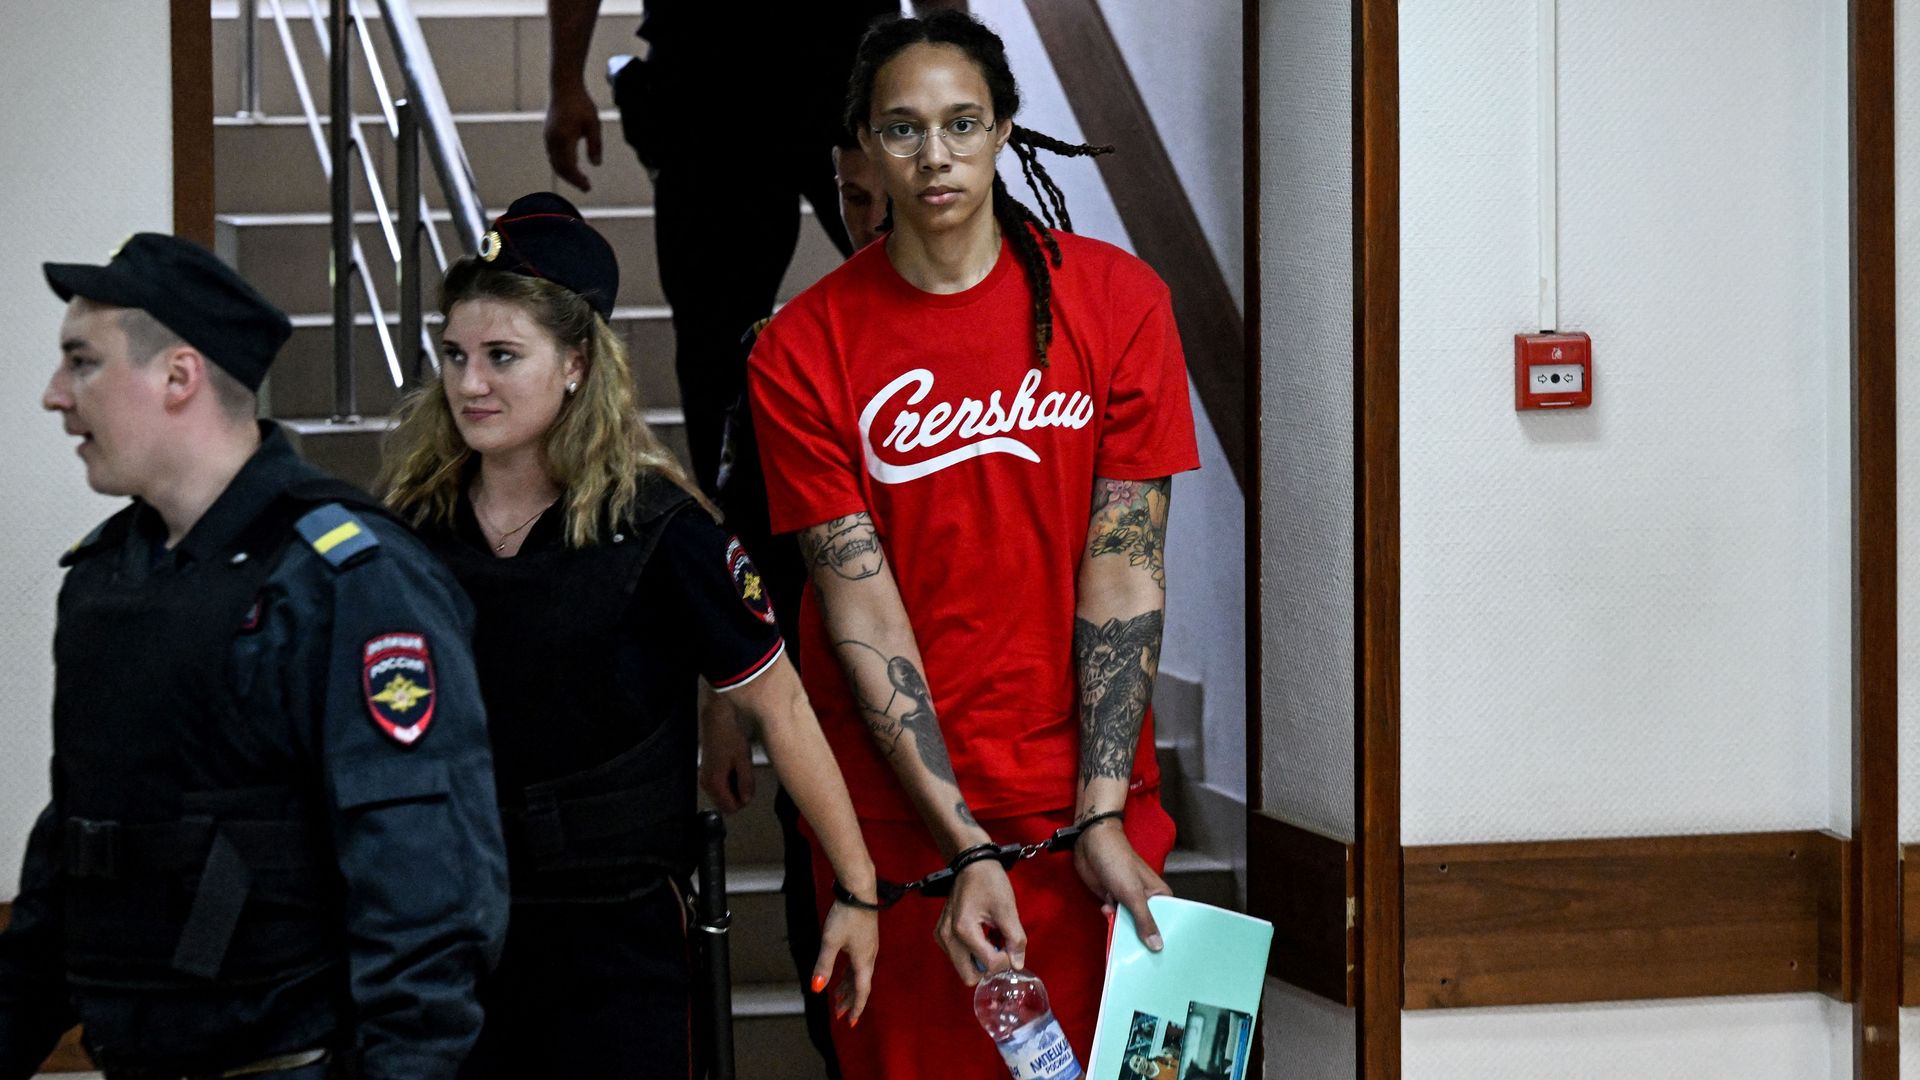 WNBA basketball superstar Brittney Griner arrives to a hearing at the Khimki Court, outside Moscow on July 7, 2022.